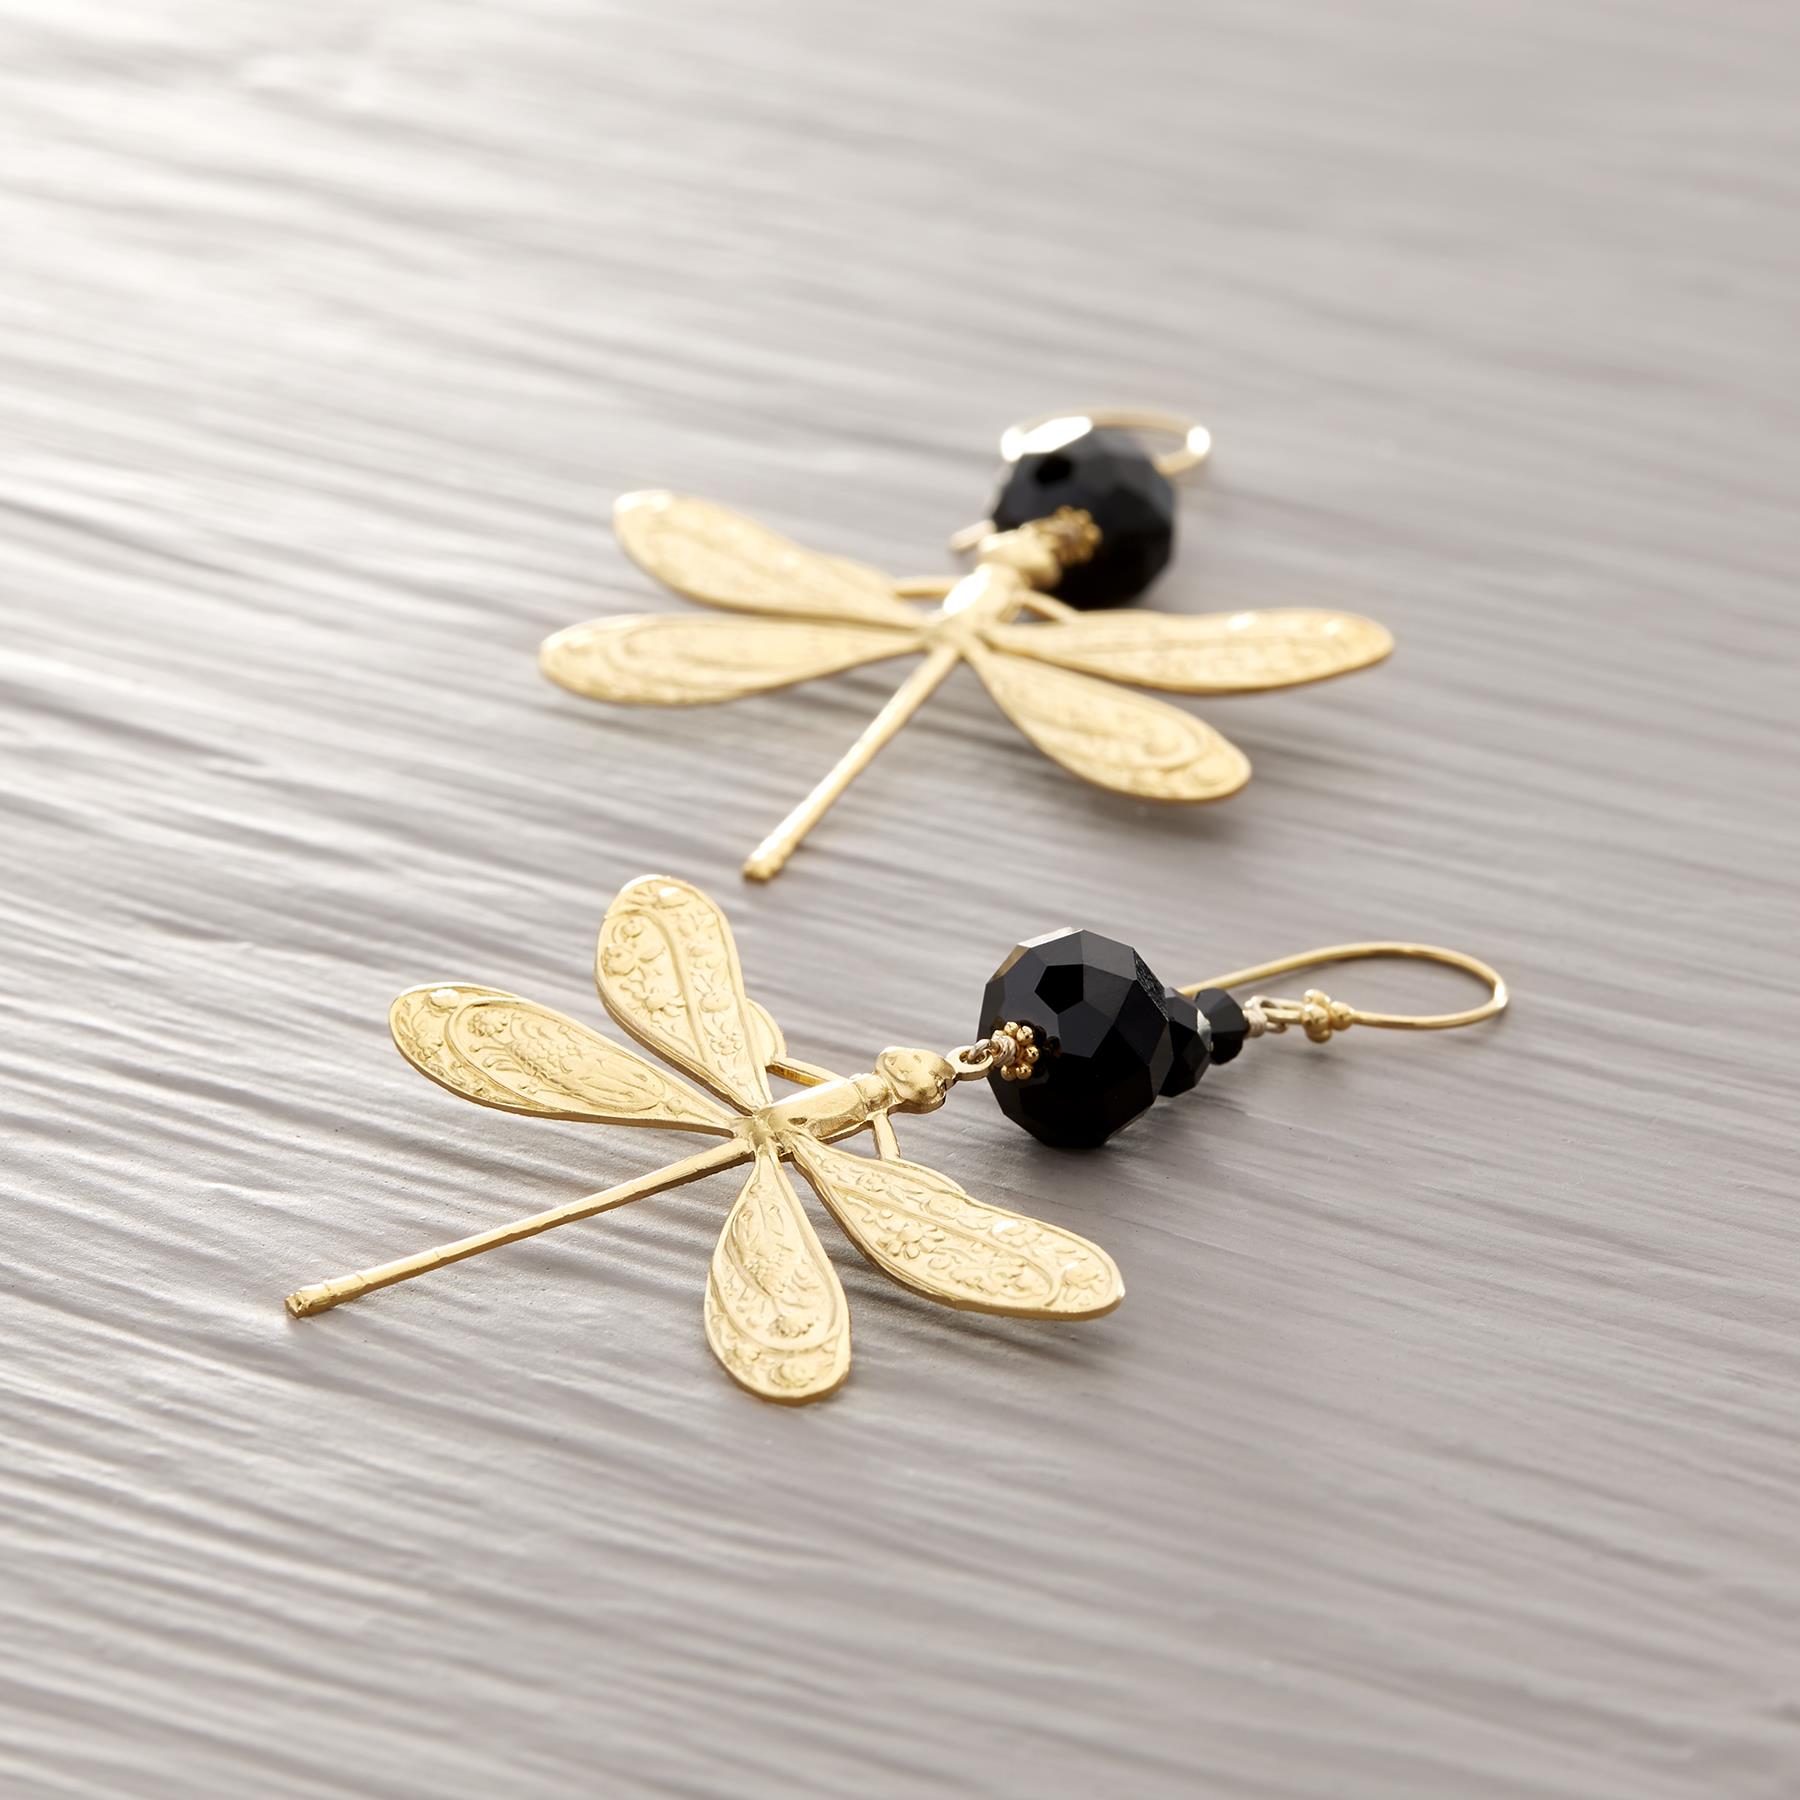 HIGH ENERGY. Drop earrings with a dragonfly motif